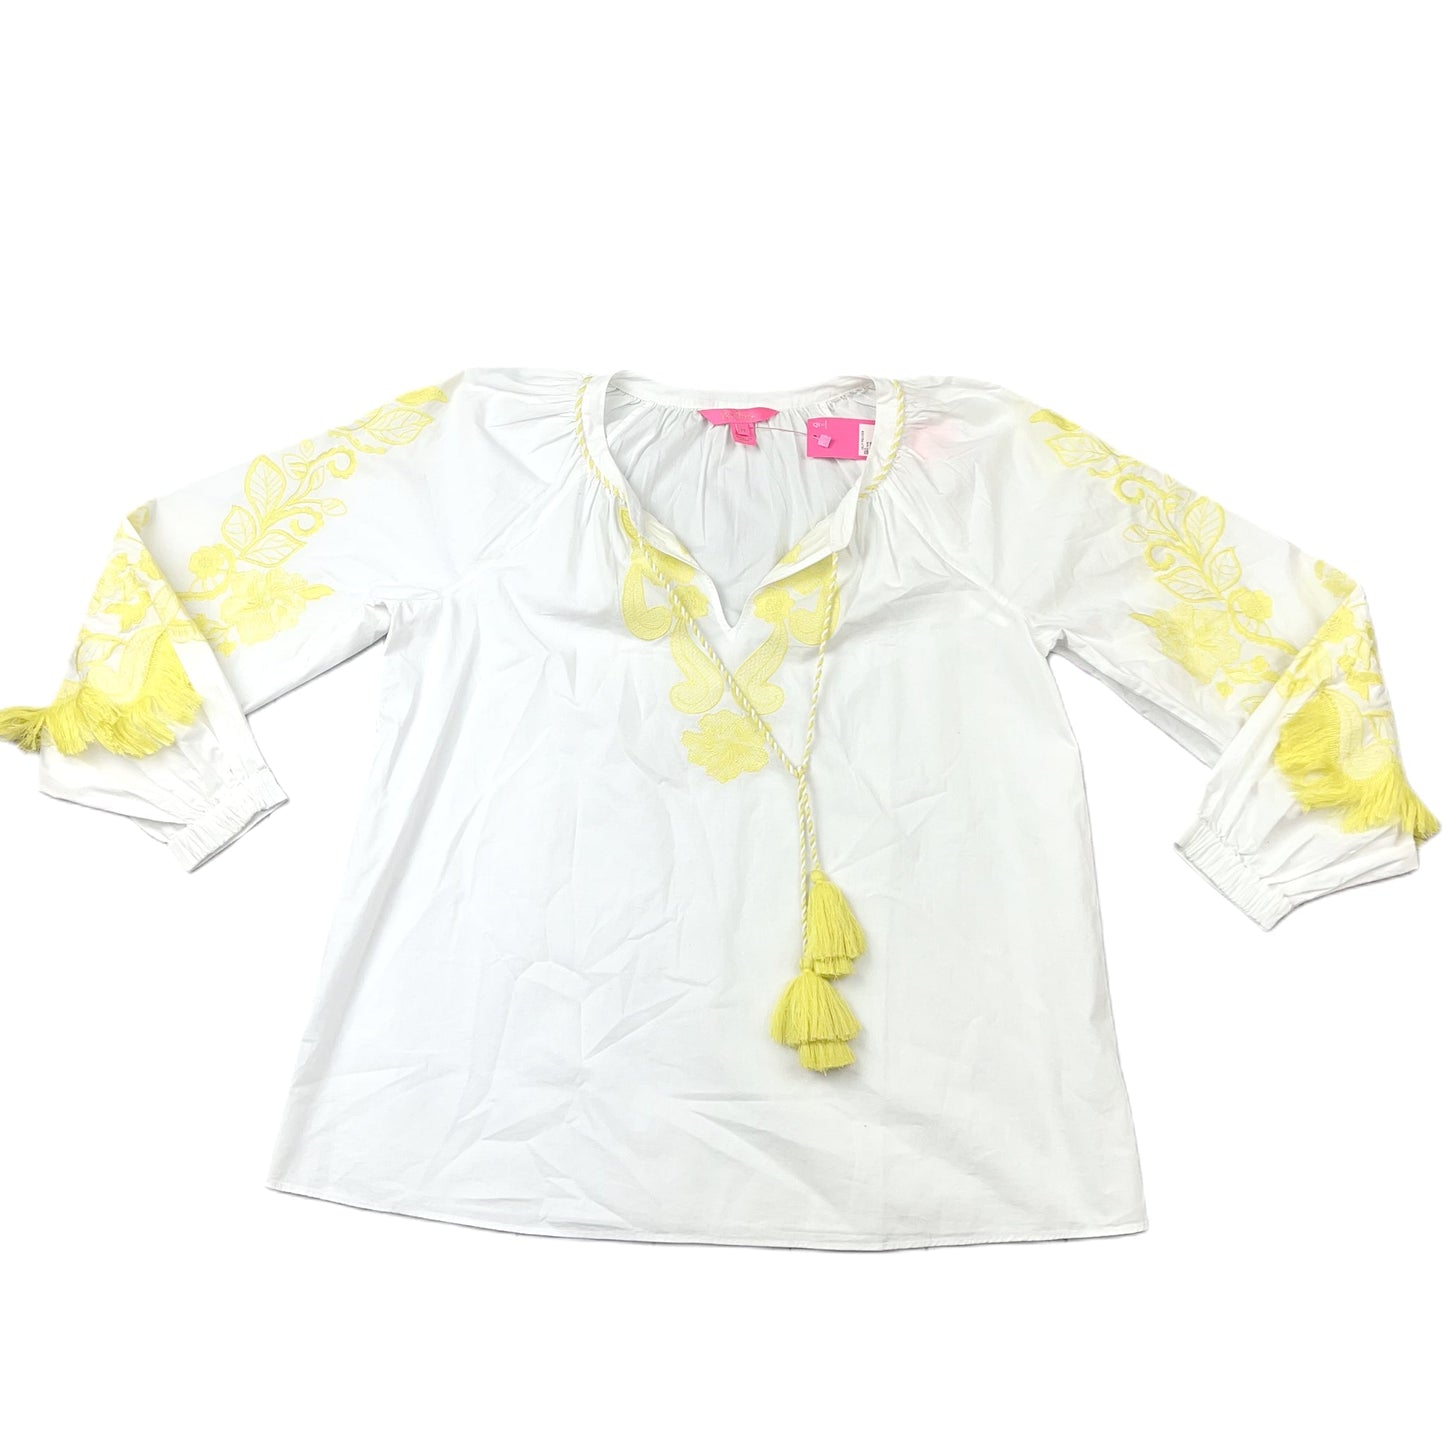 White & Yellow Top Long Sleeve Designer By Lilly Pulitzer, Size: M